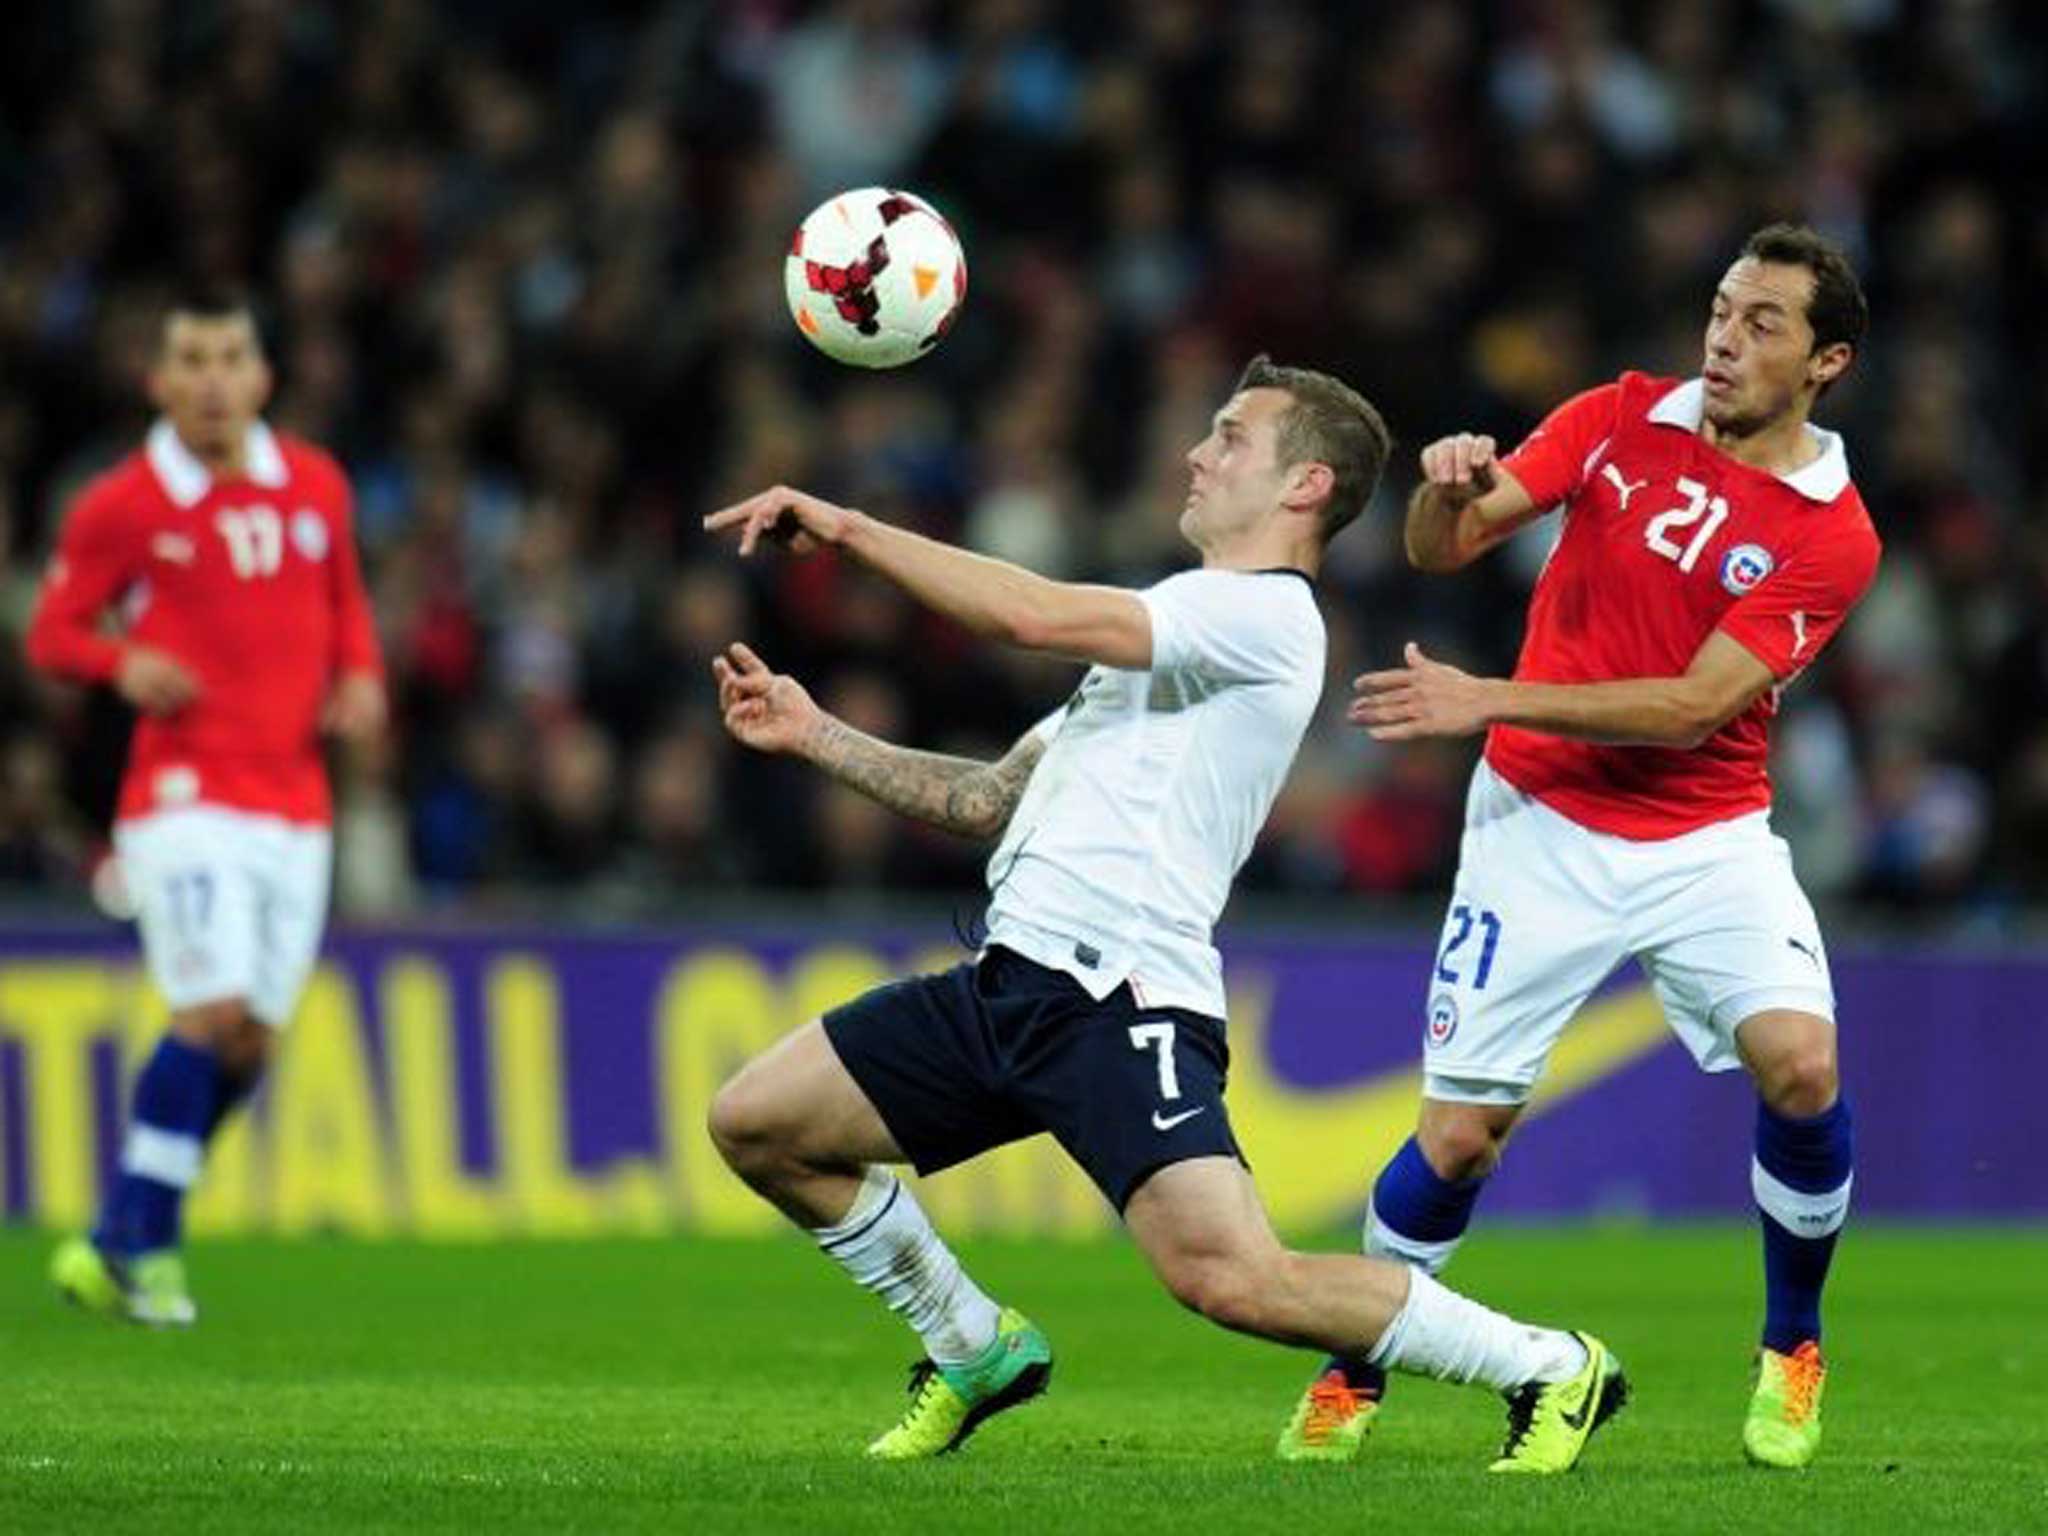 Jack Wilshere shields the ball from Chile’s Marcelo Diaz at Wembley on Friday